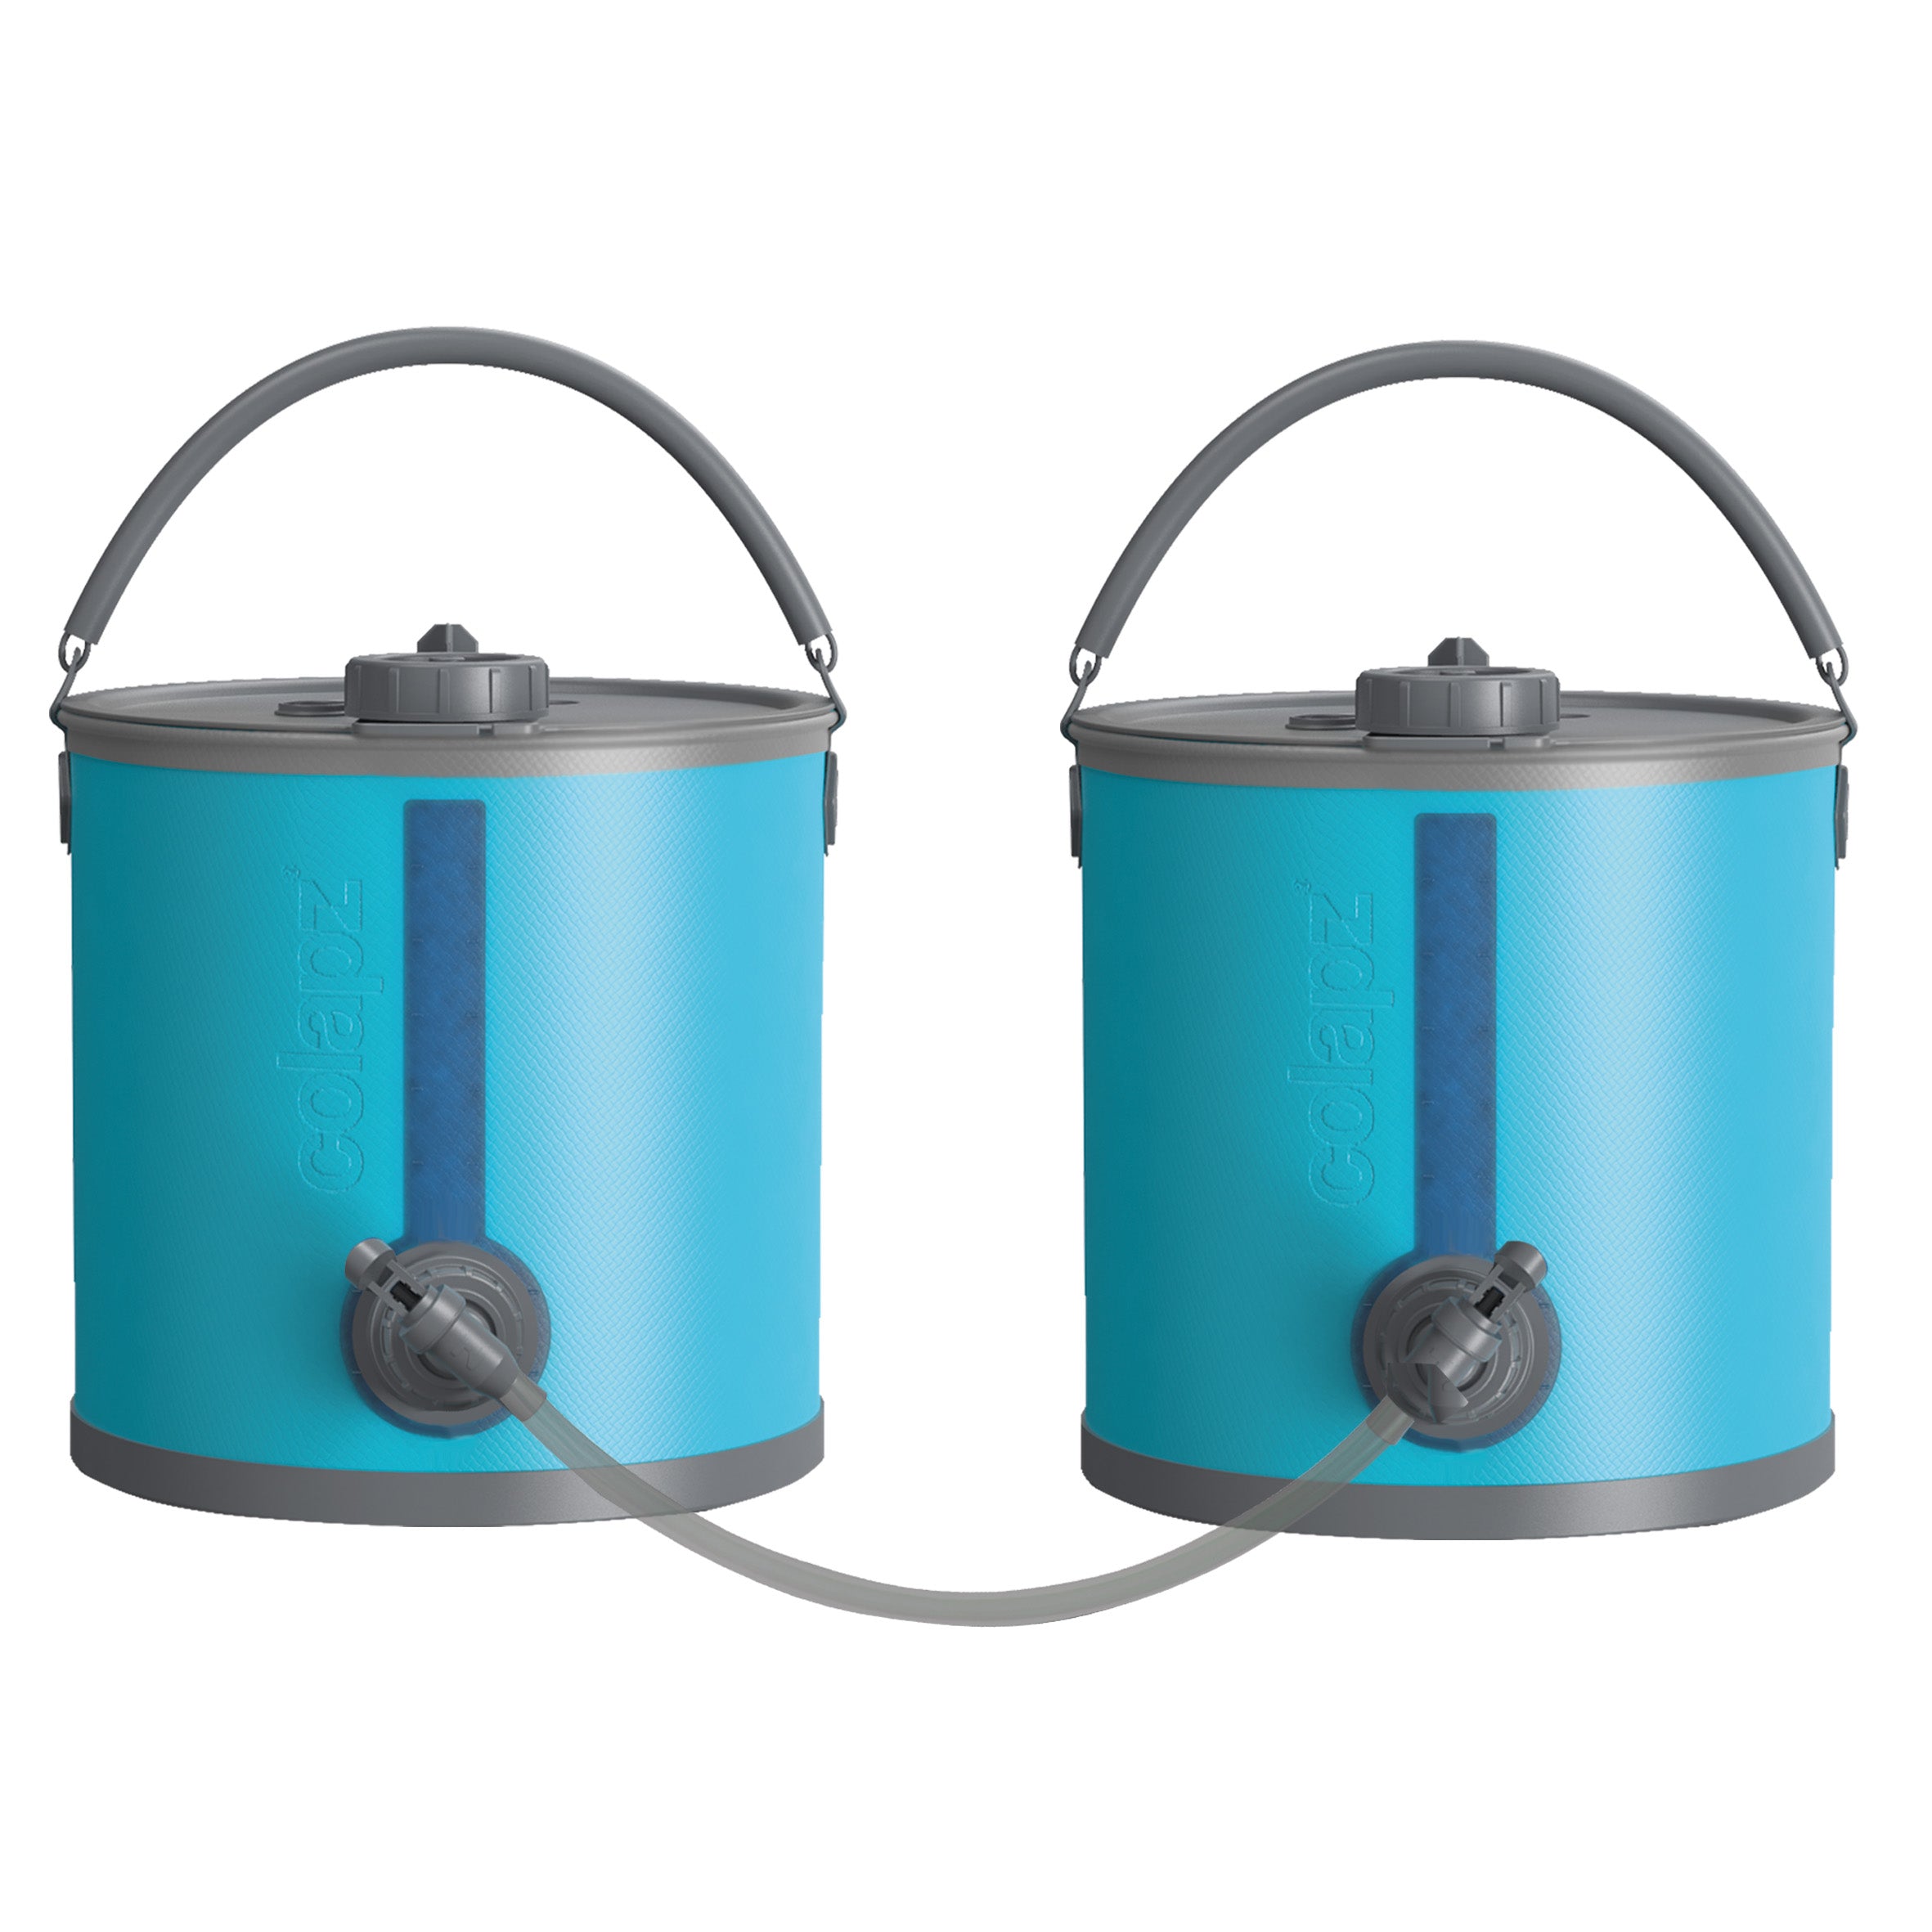 LINKING TUBE (60cm) for 20L Collapsible 2-in-1 Water Carrier & Bucket with Lockable Lid